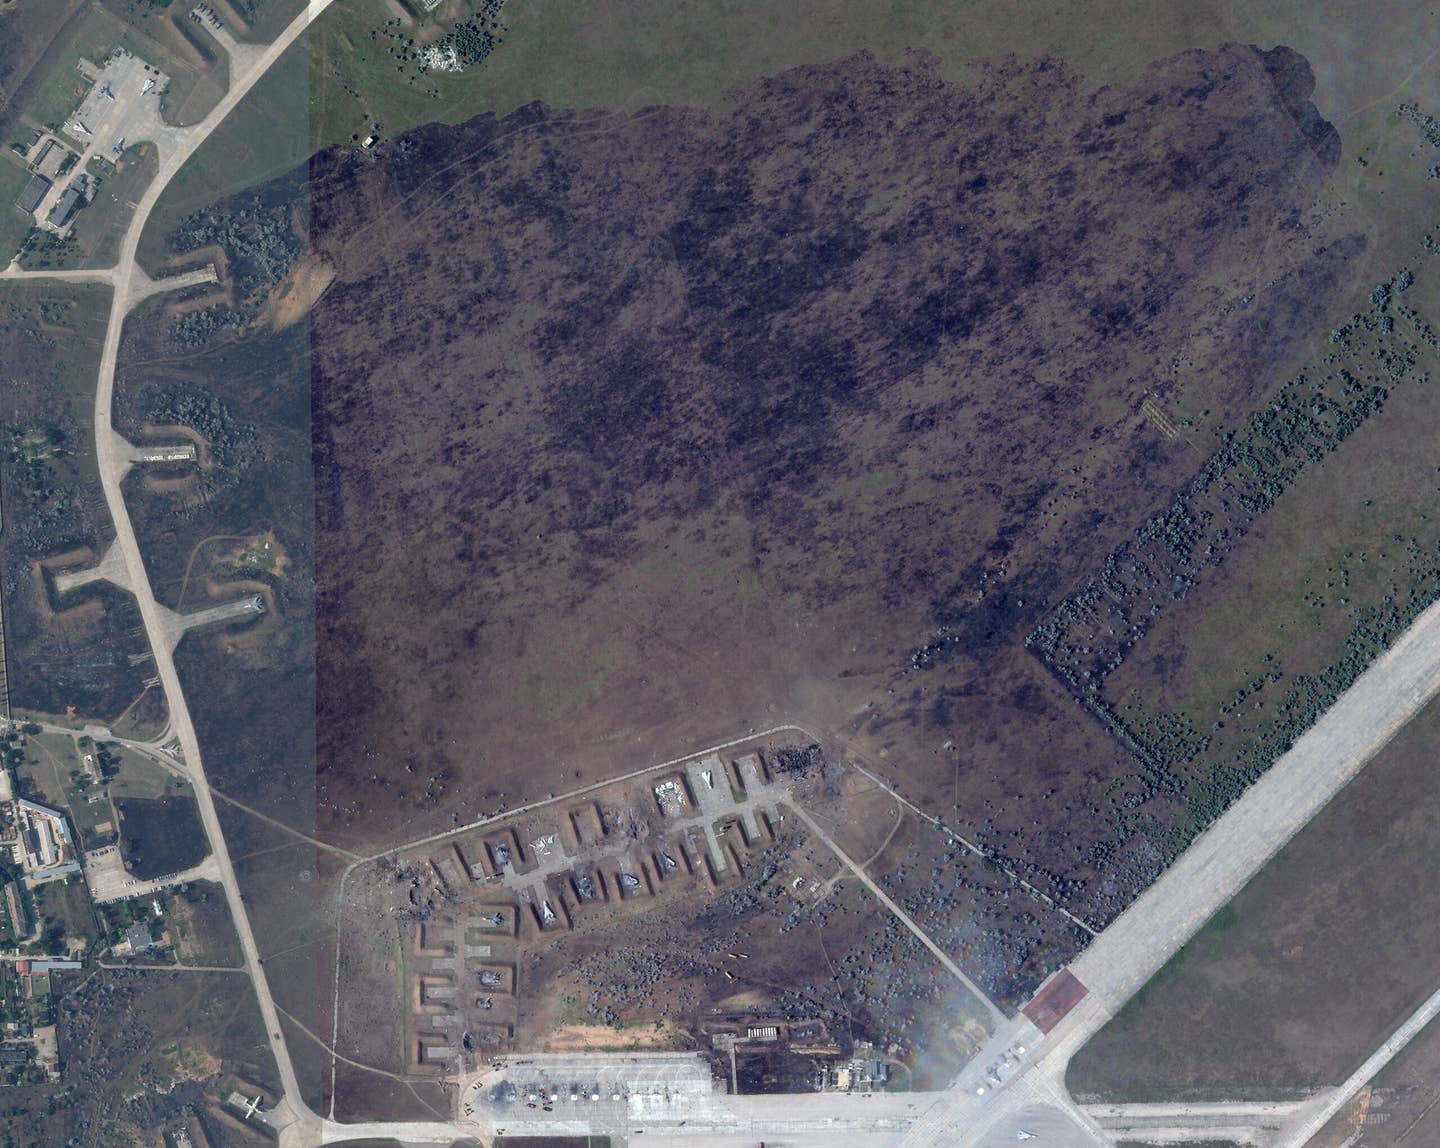 A zoomed-out look at the massive now-scorched area at Saki Air Base that shows how far the ensuing fire appears to have spread. <em>PHOTO © 2022 PLANET LABS INC. ALL RIGHTS RESERVED. REPRINTED BY PERMISSION</em>